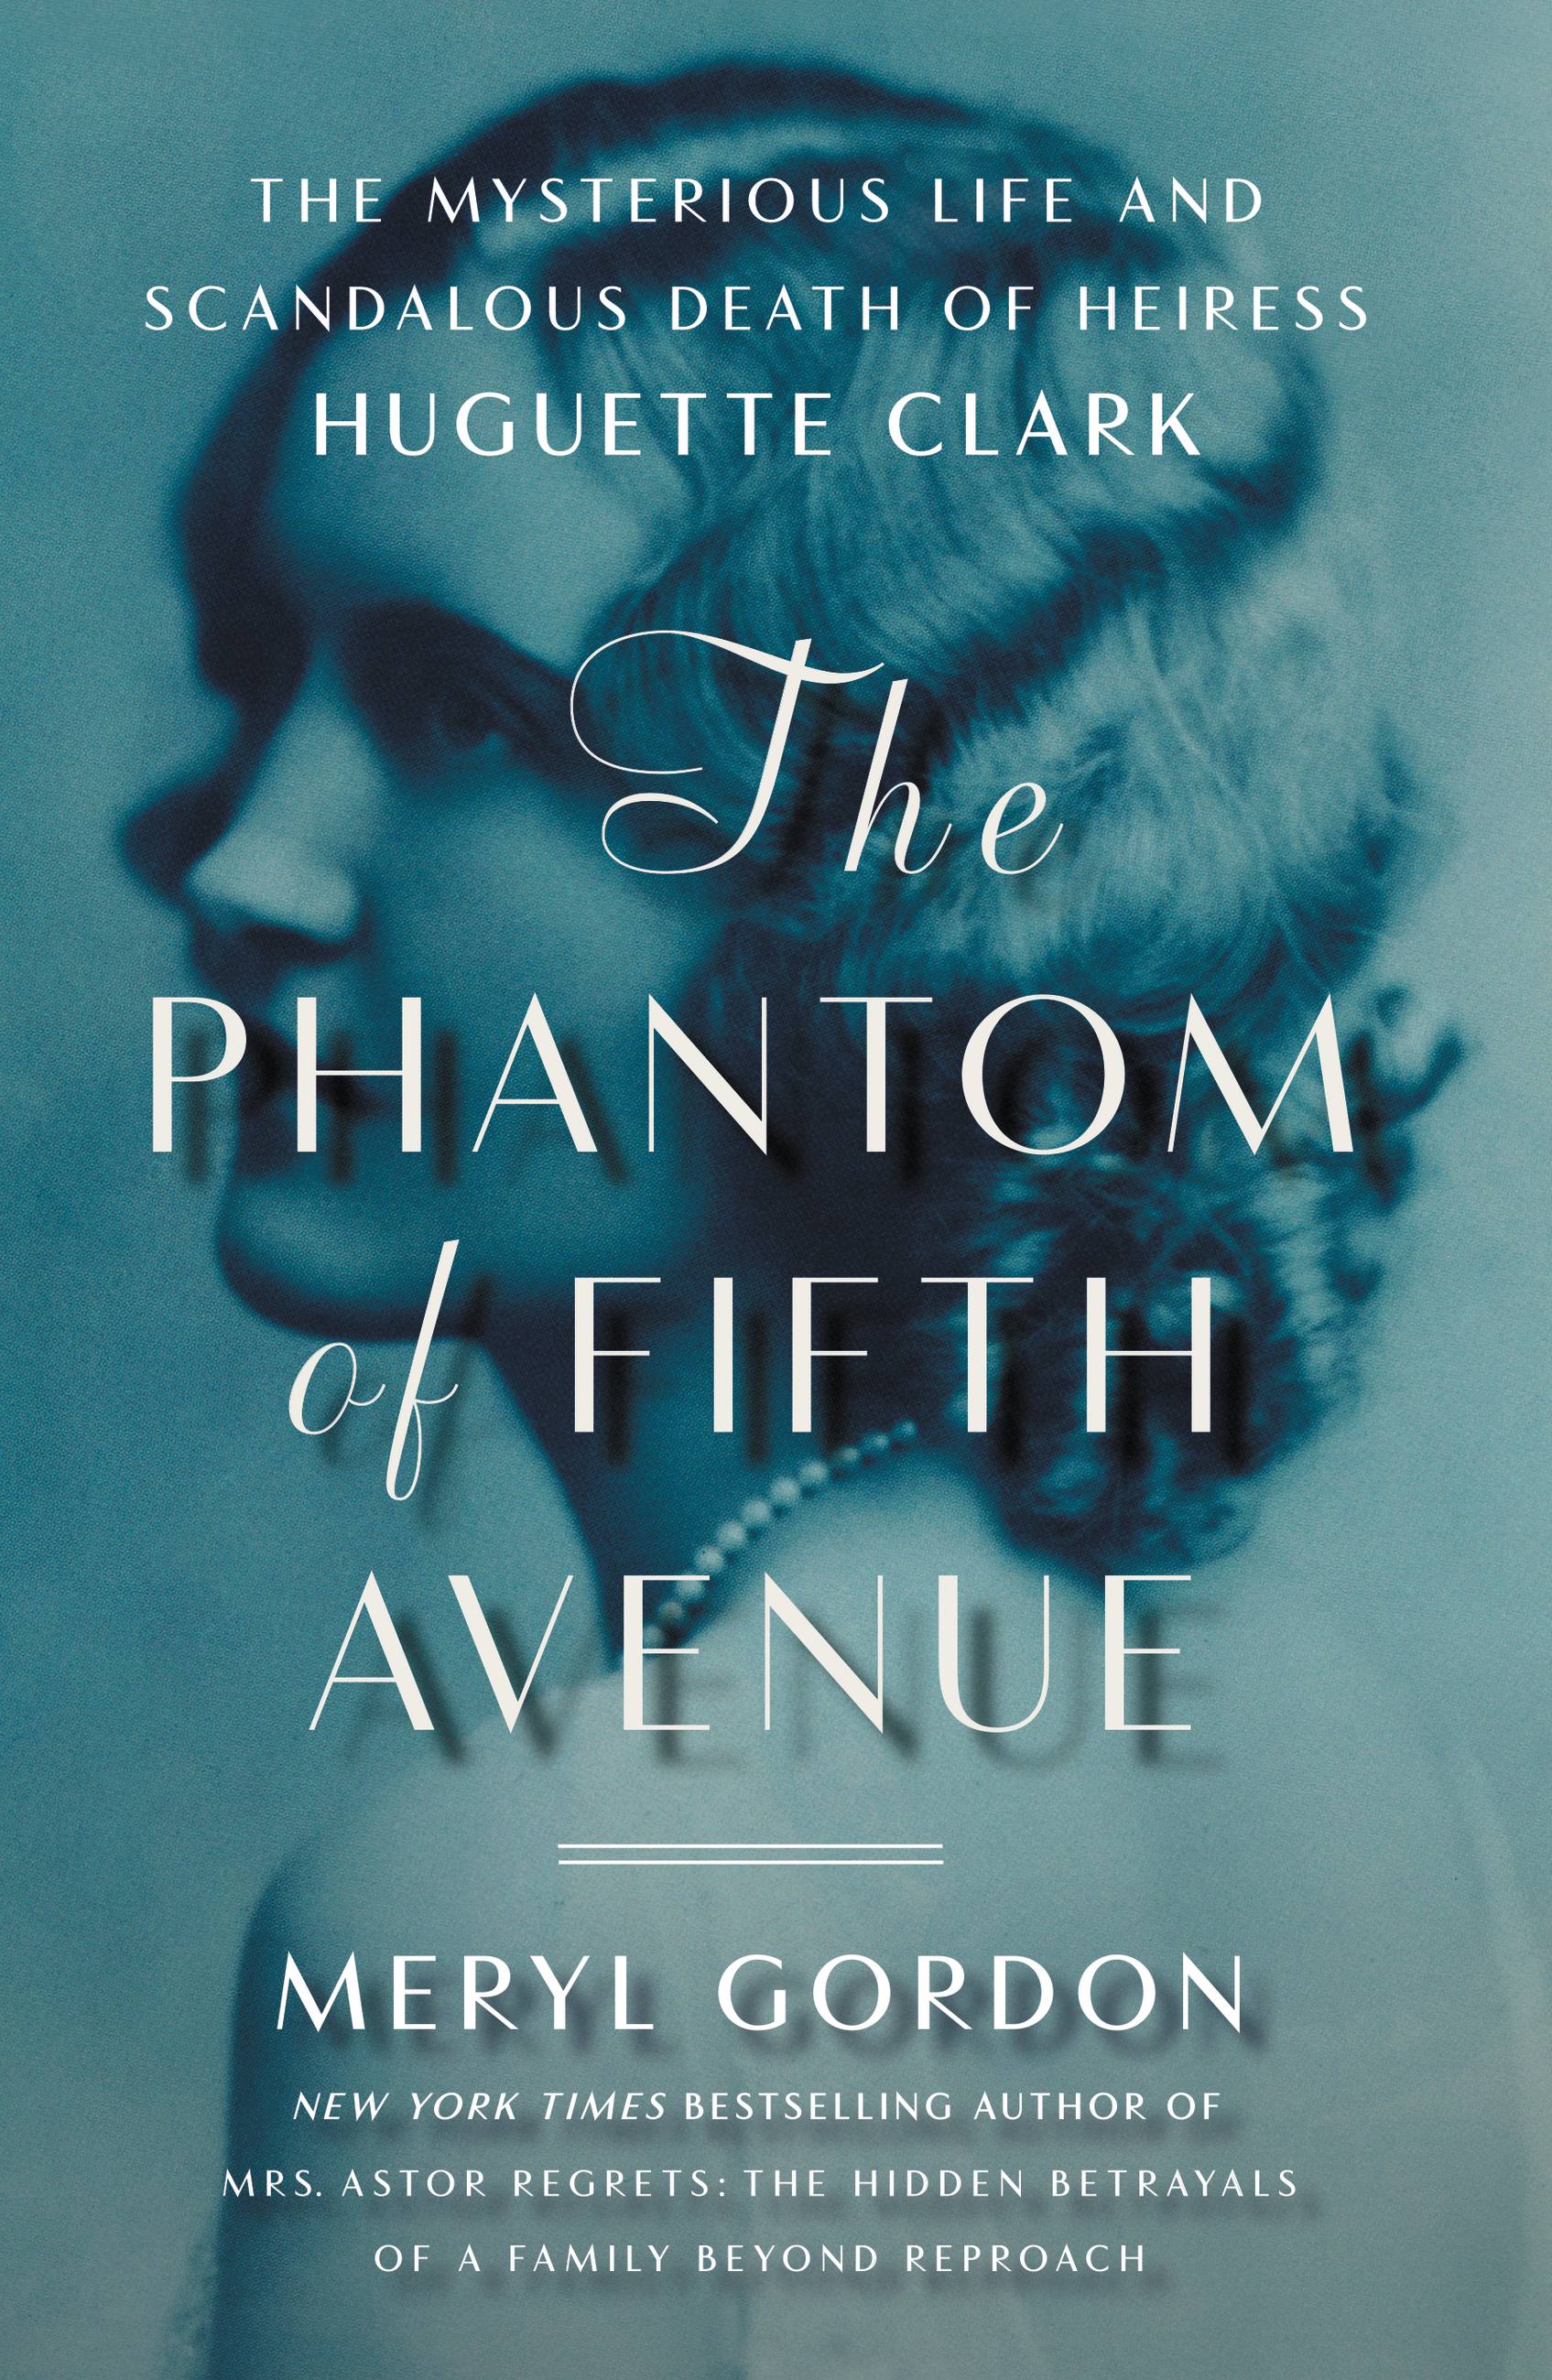 The Phantom of Fifth Avenue : The Mysterious Life and Scandalous Death of Heiress Huguette Clark (Hardcover) - image 1 of 1